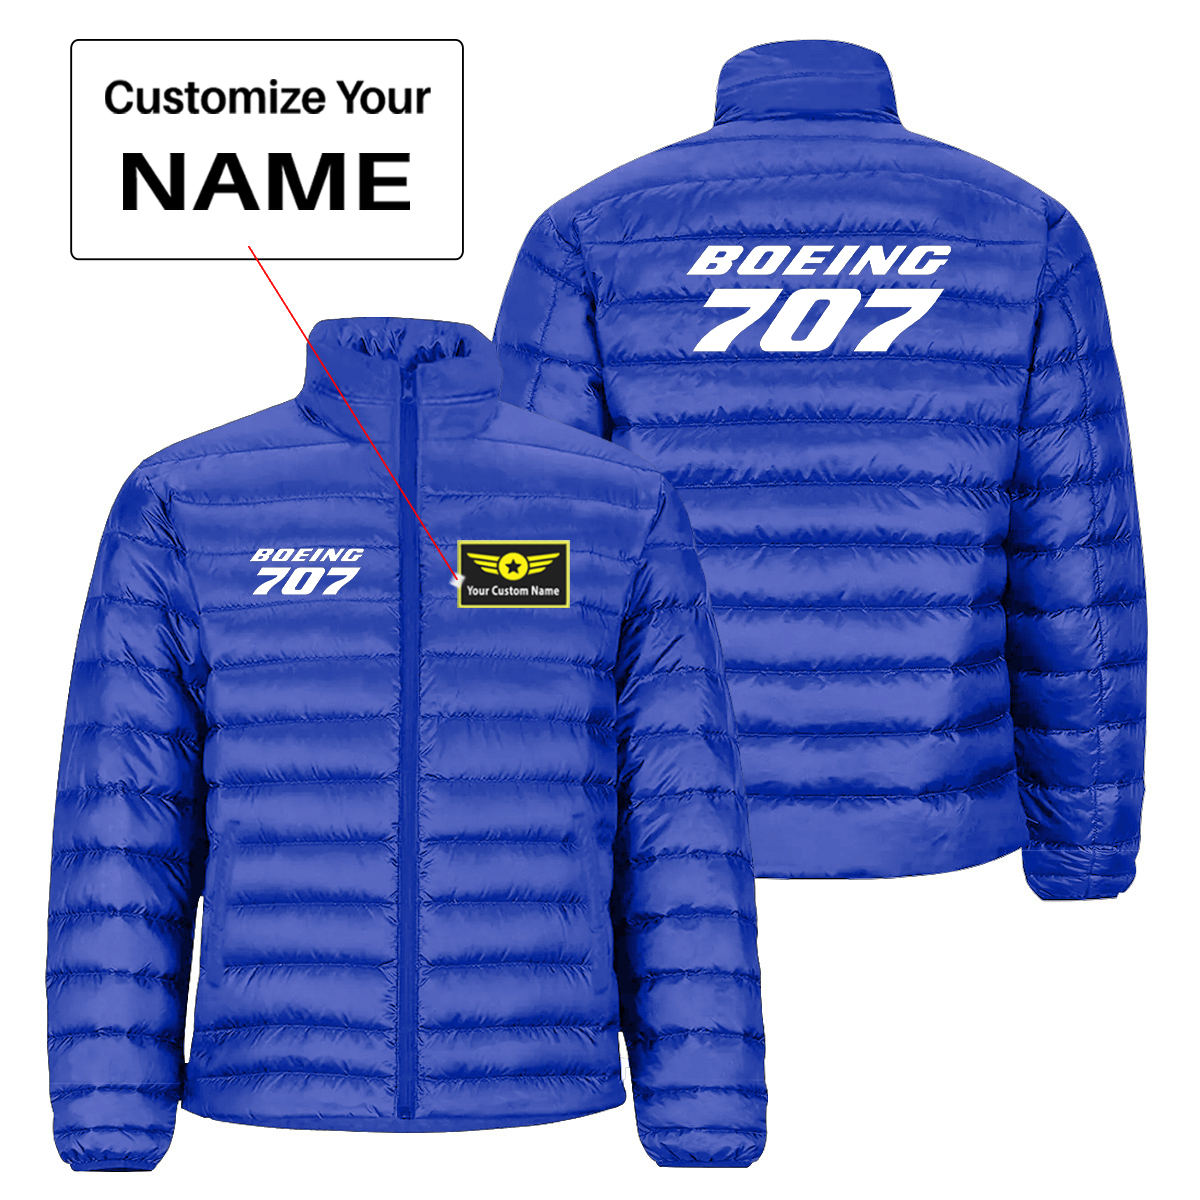 Boeing 707 & Text Designed Padded Jackets